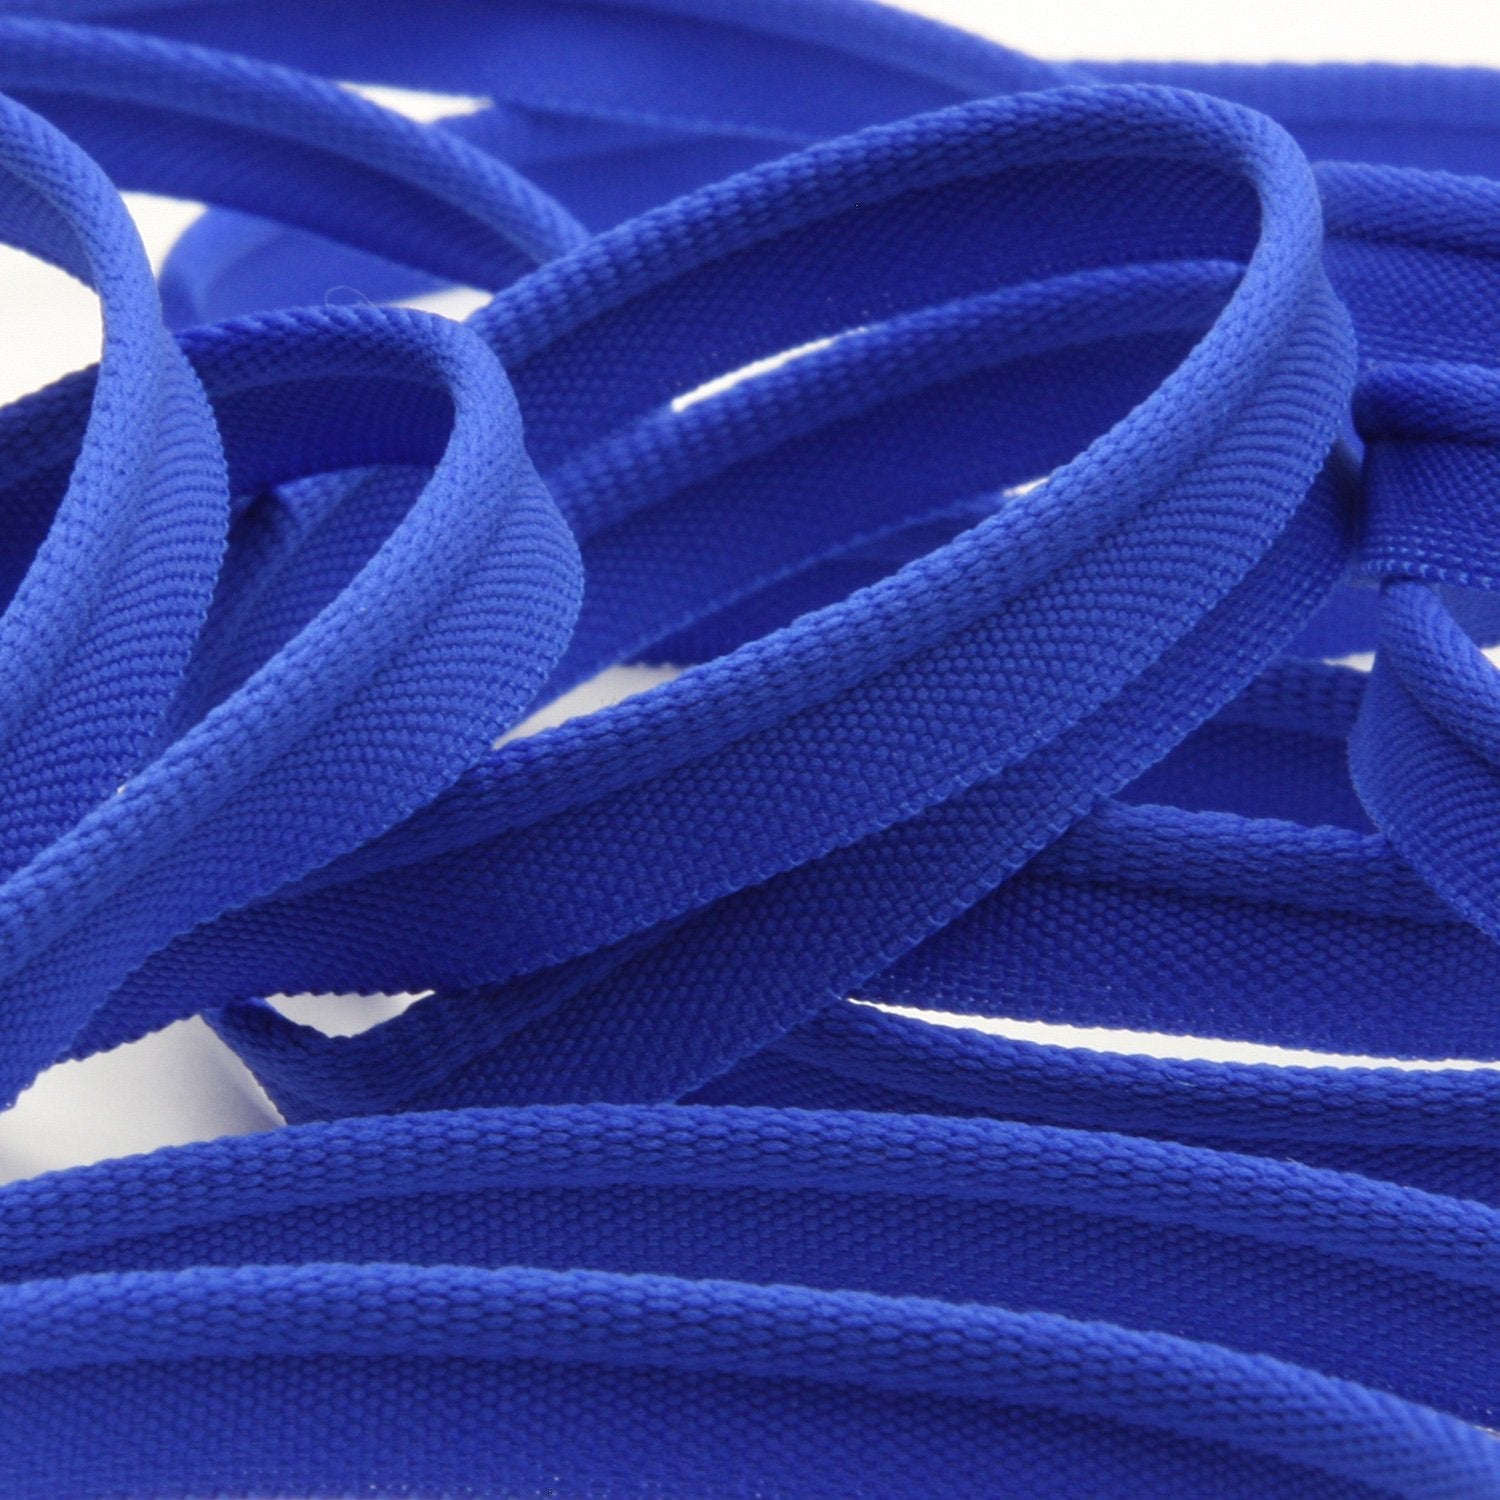 5m Round High Elasticity Sewing Elastic Band Fitted Fiat Rubber Belt  Elastic Rope Width 3mm